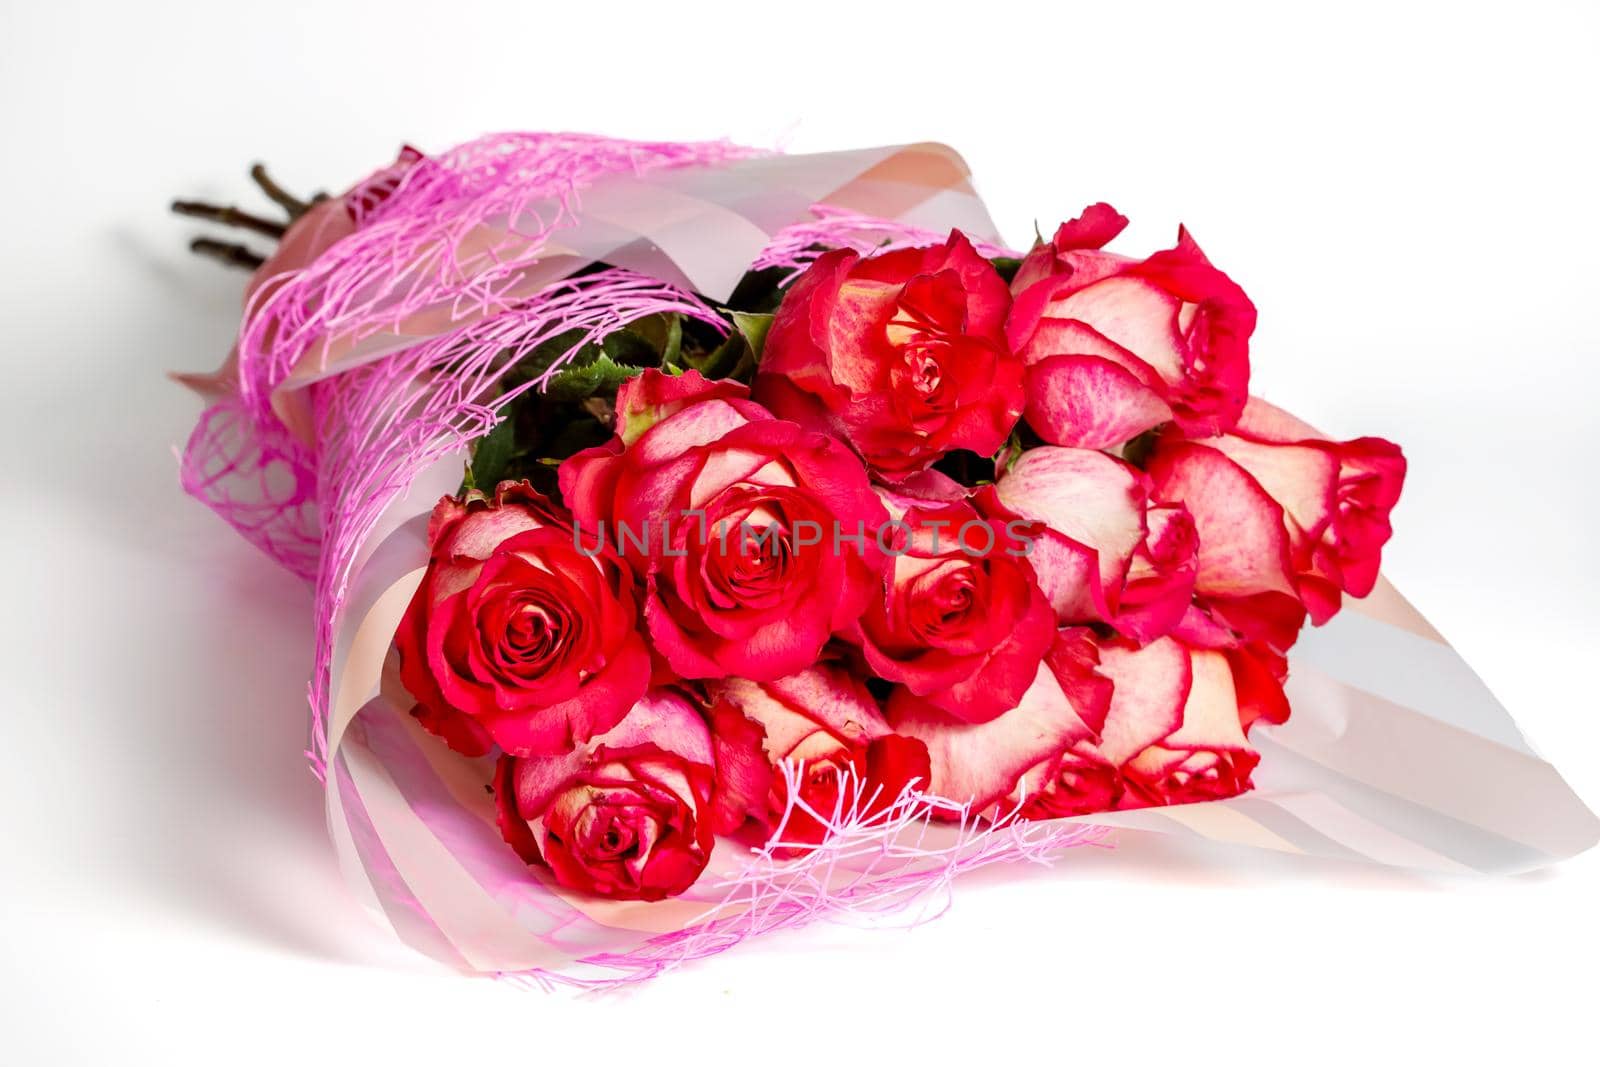 Bouquet of red roses in gift paper packaging on a white background. by galinasharapova